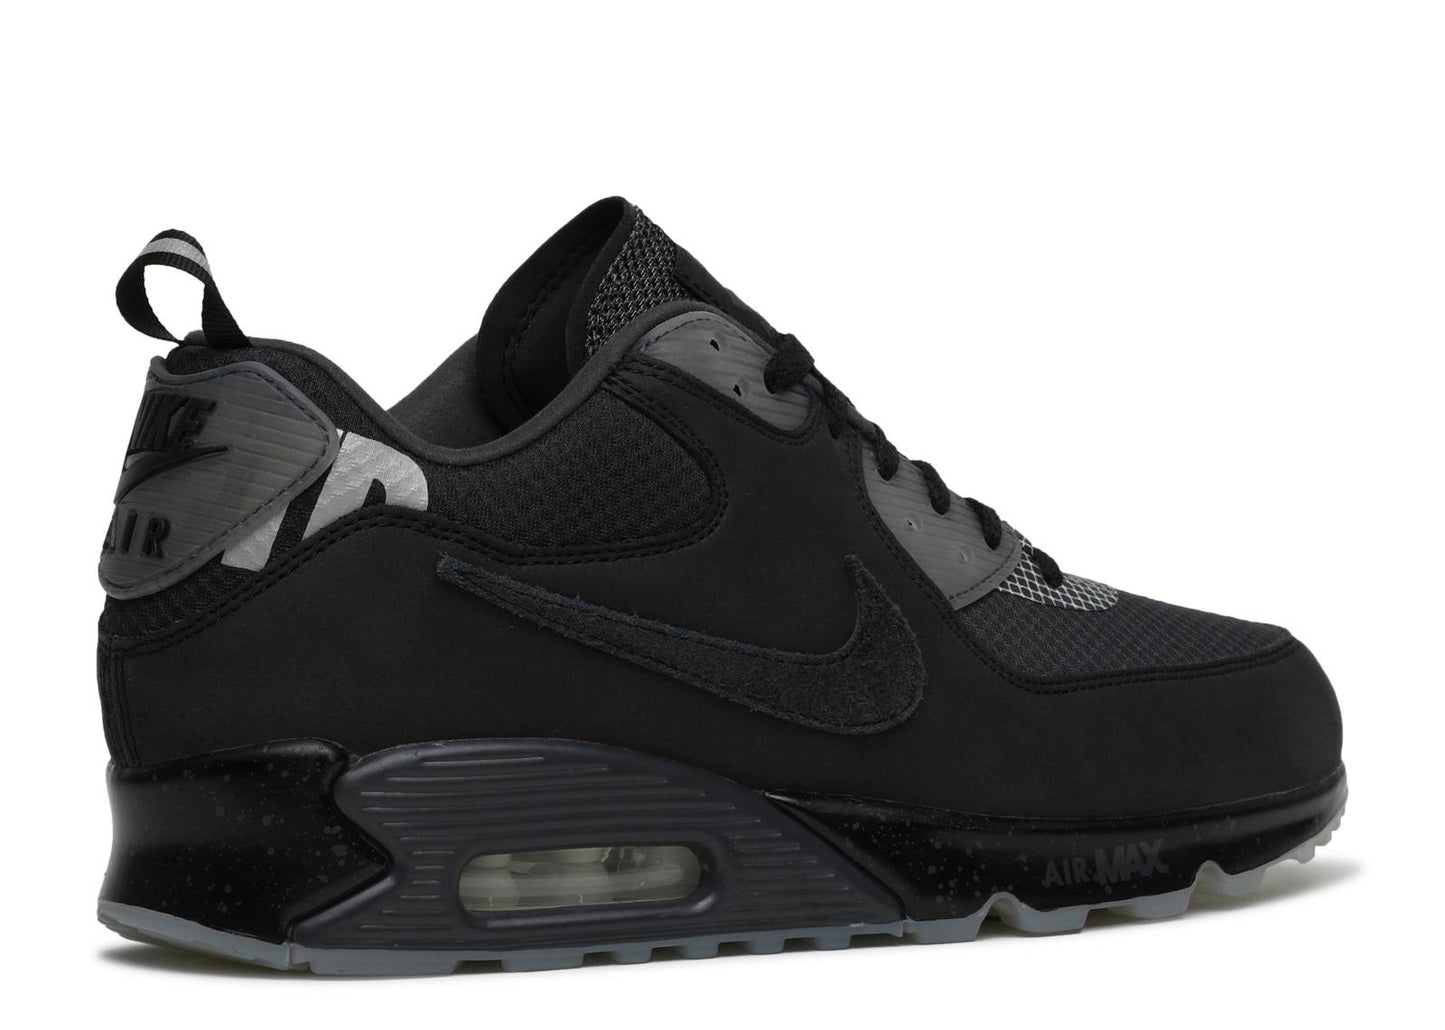 Undefeated x Nike Air Max 90 "Black Anthracite"